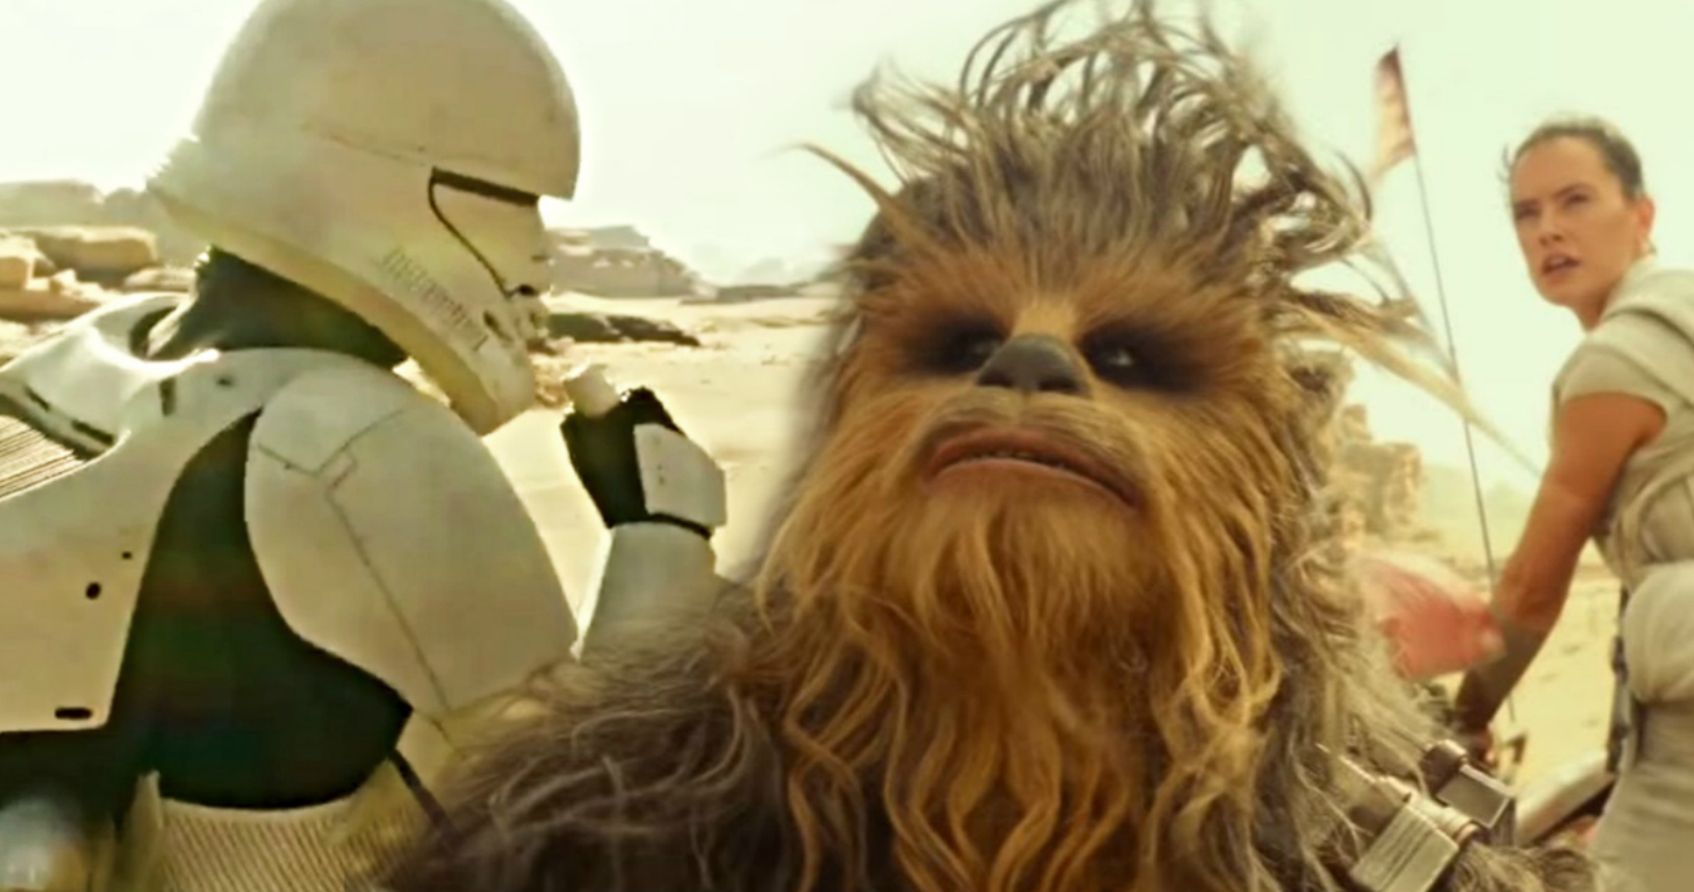 First The Rise of Skywalker Clip Unleashes Flying Stormtroopers